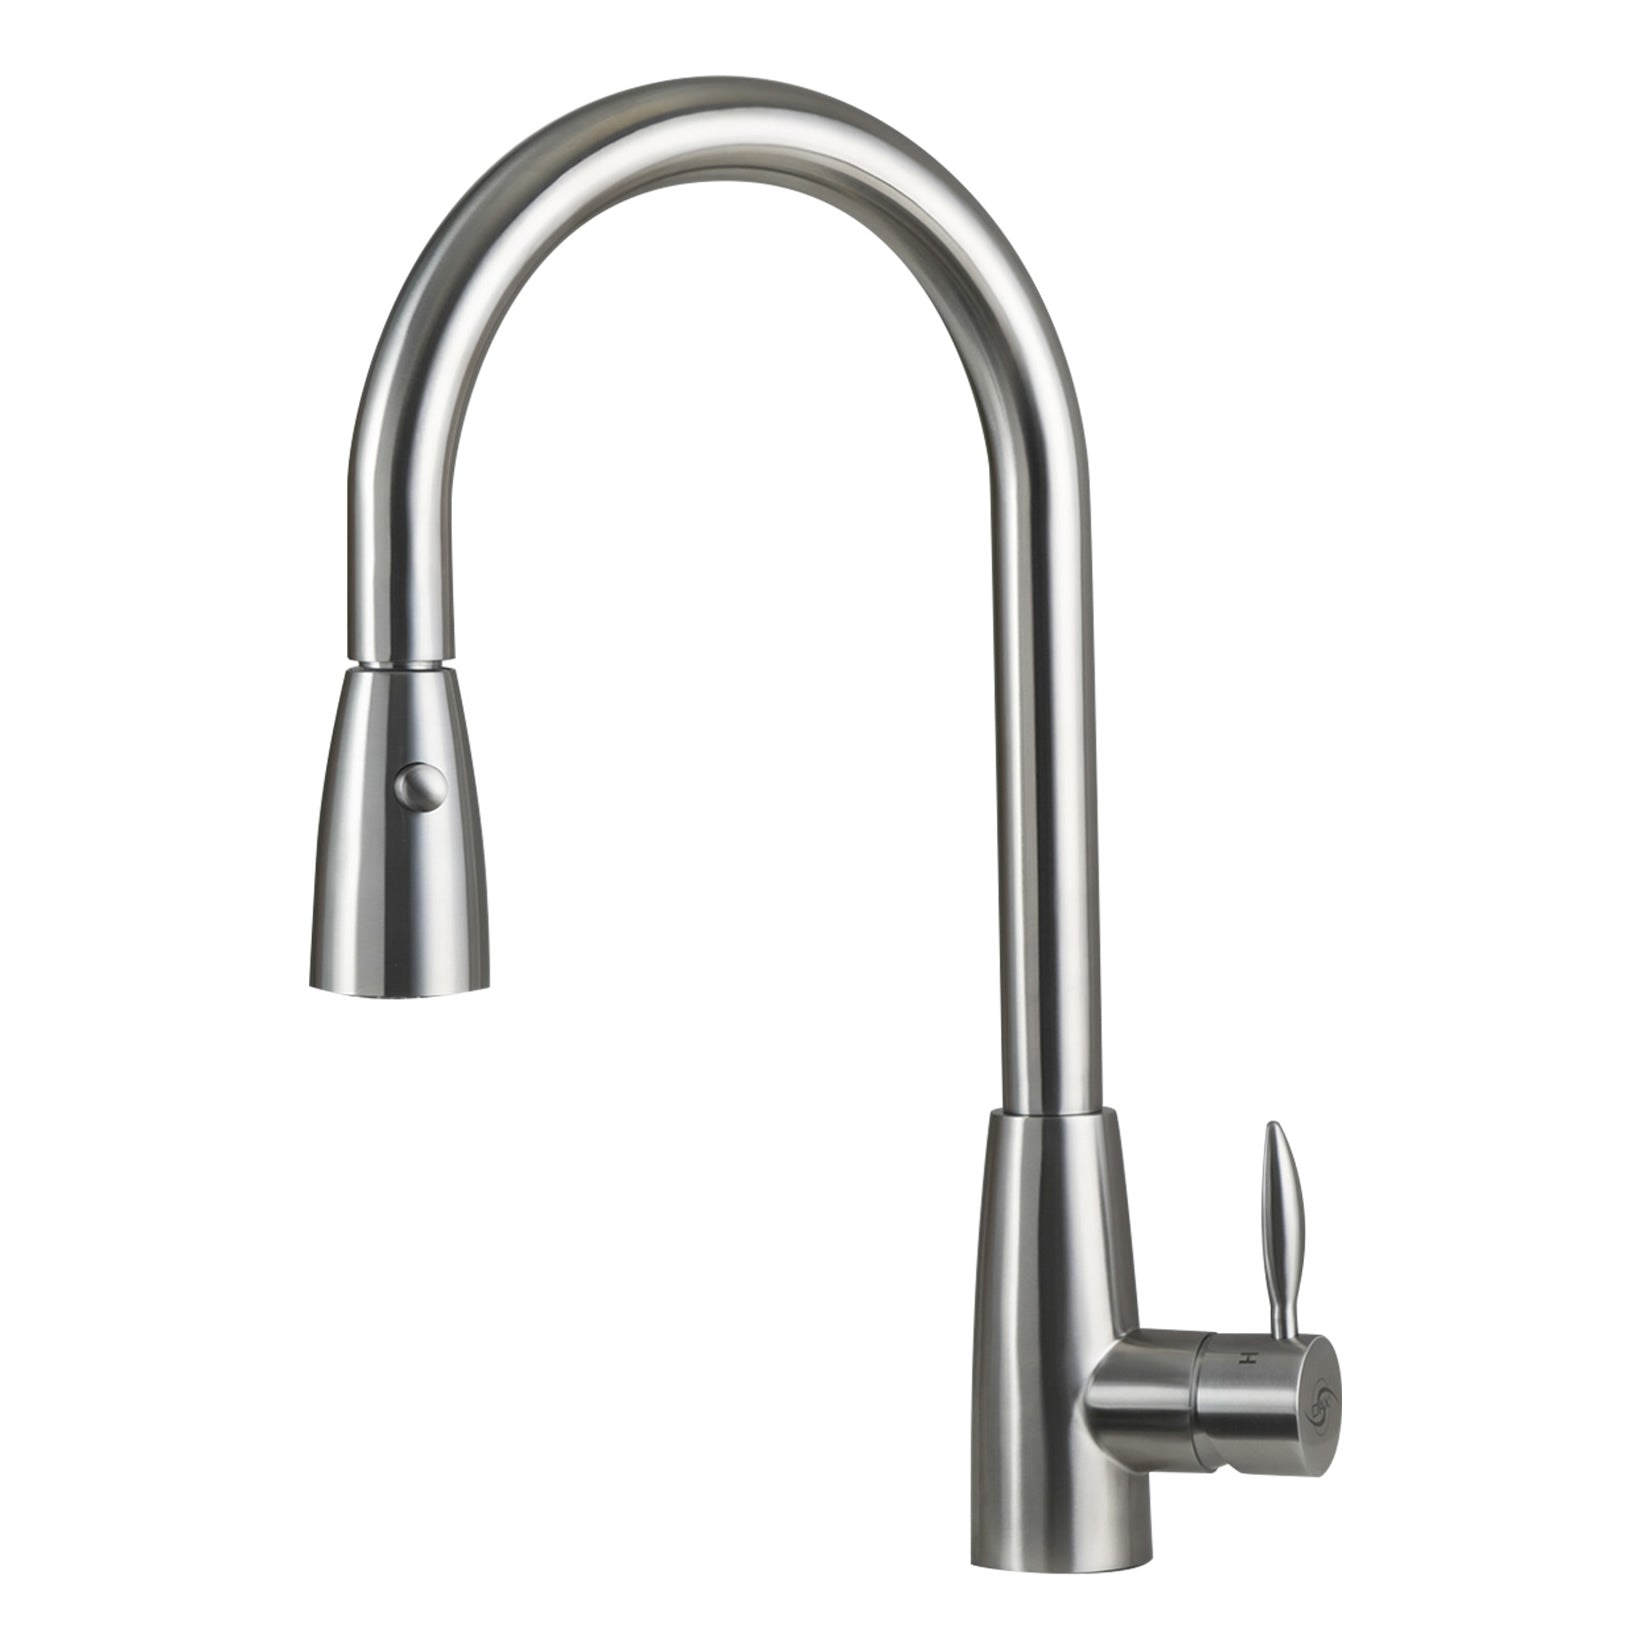 DAX Single Handle Pull Down Kitchen Faucet with Dual Sprayer, Stainless Steel Shower Head, Brushed Finish, Size 8-11/16 x 17-1/8 Inches (DAX-002-02B)